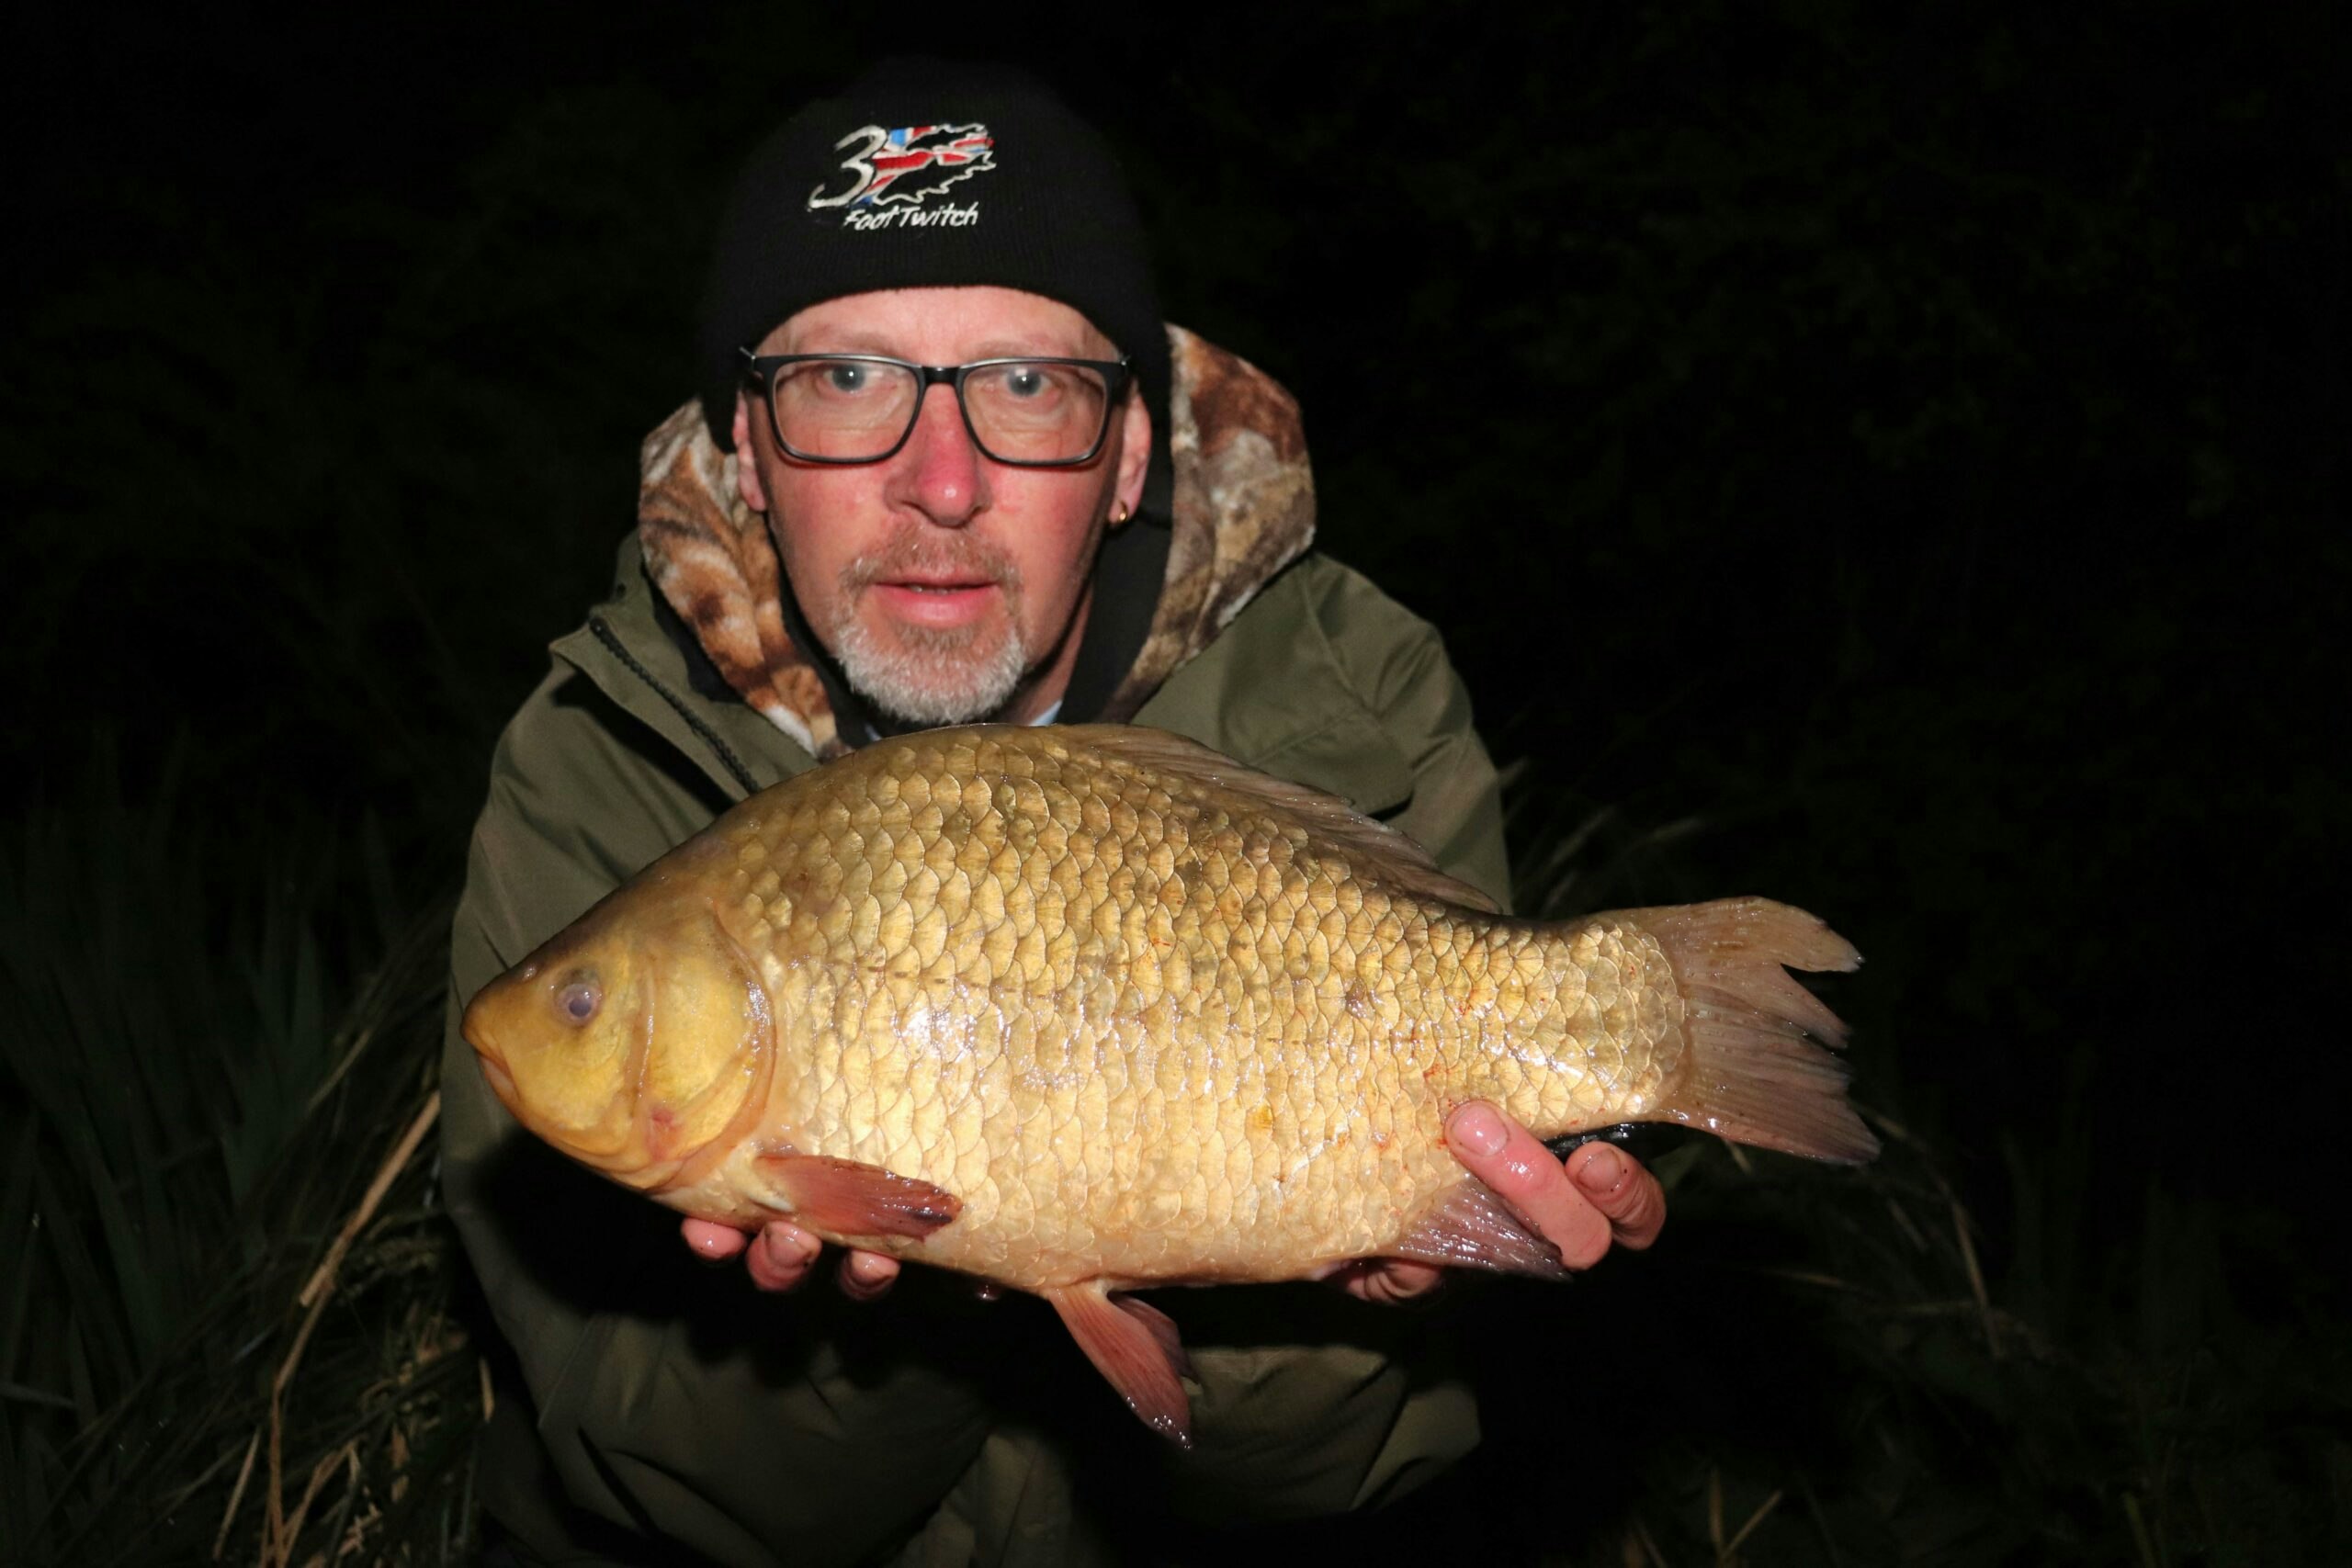 Fishing PVA bags for crucians has transformed my catches” – David